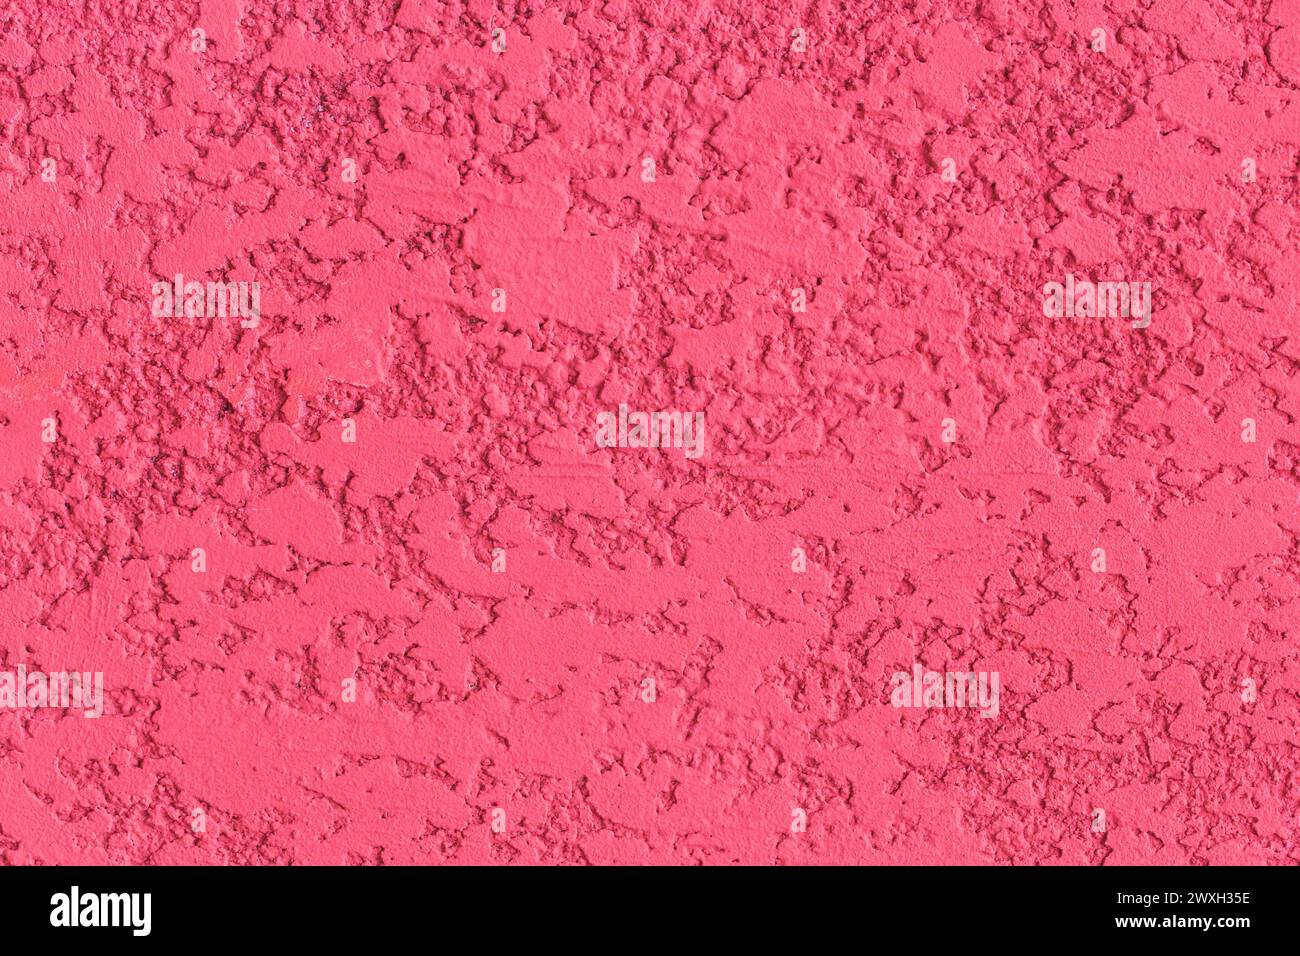 Pink paint texture plaster wall rough stucco background solid abstract pattern structure. Stock Photo